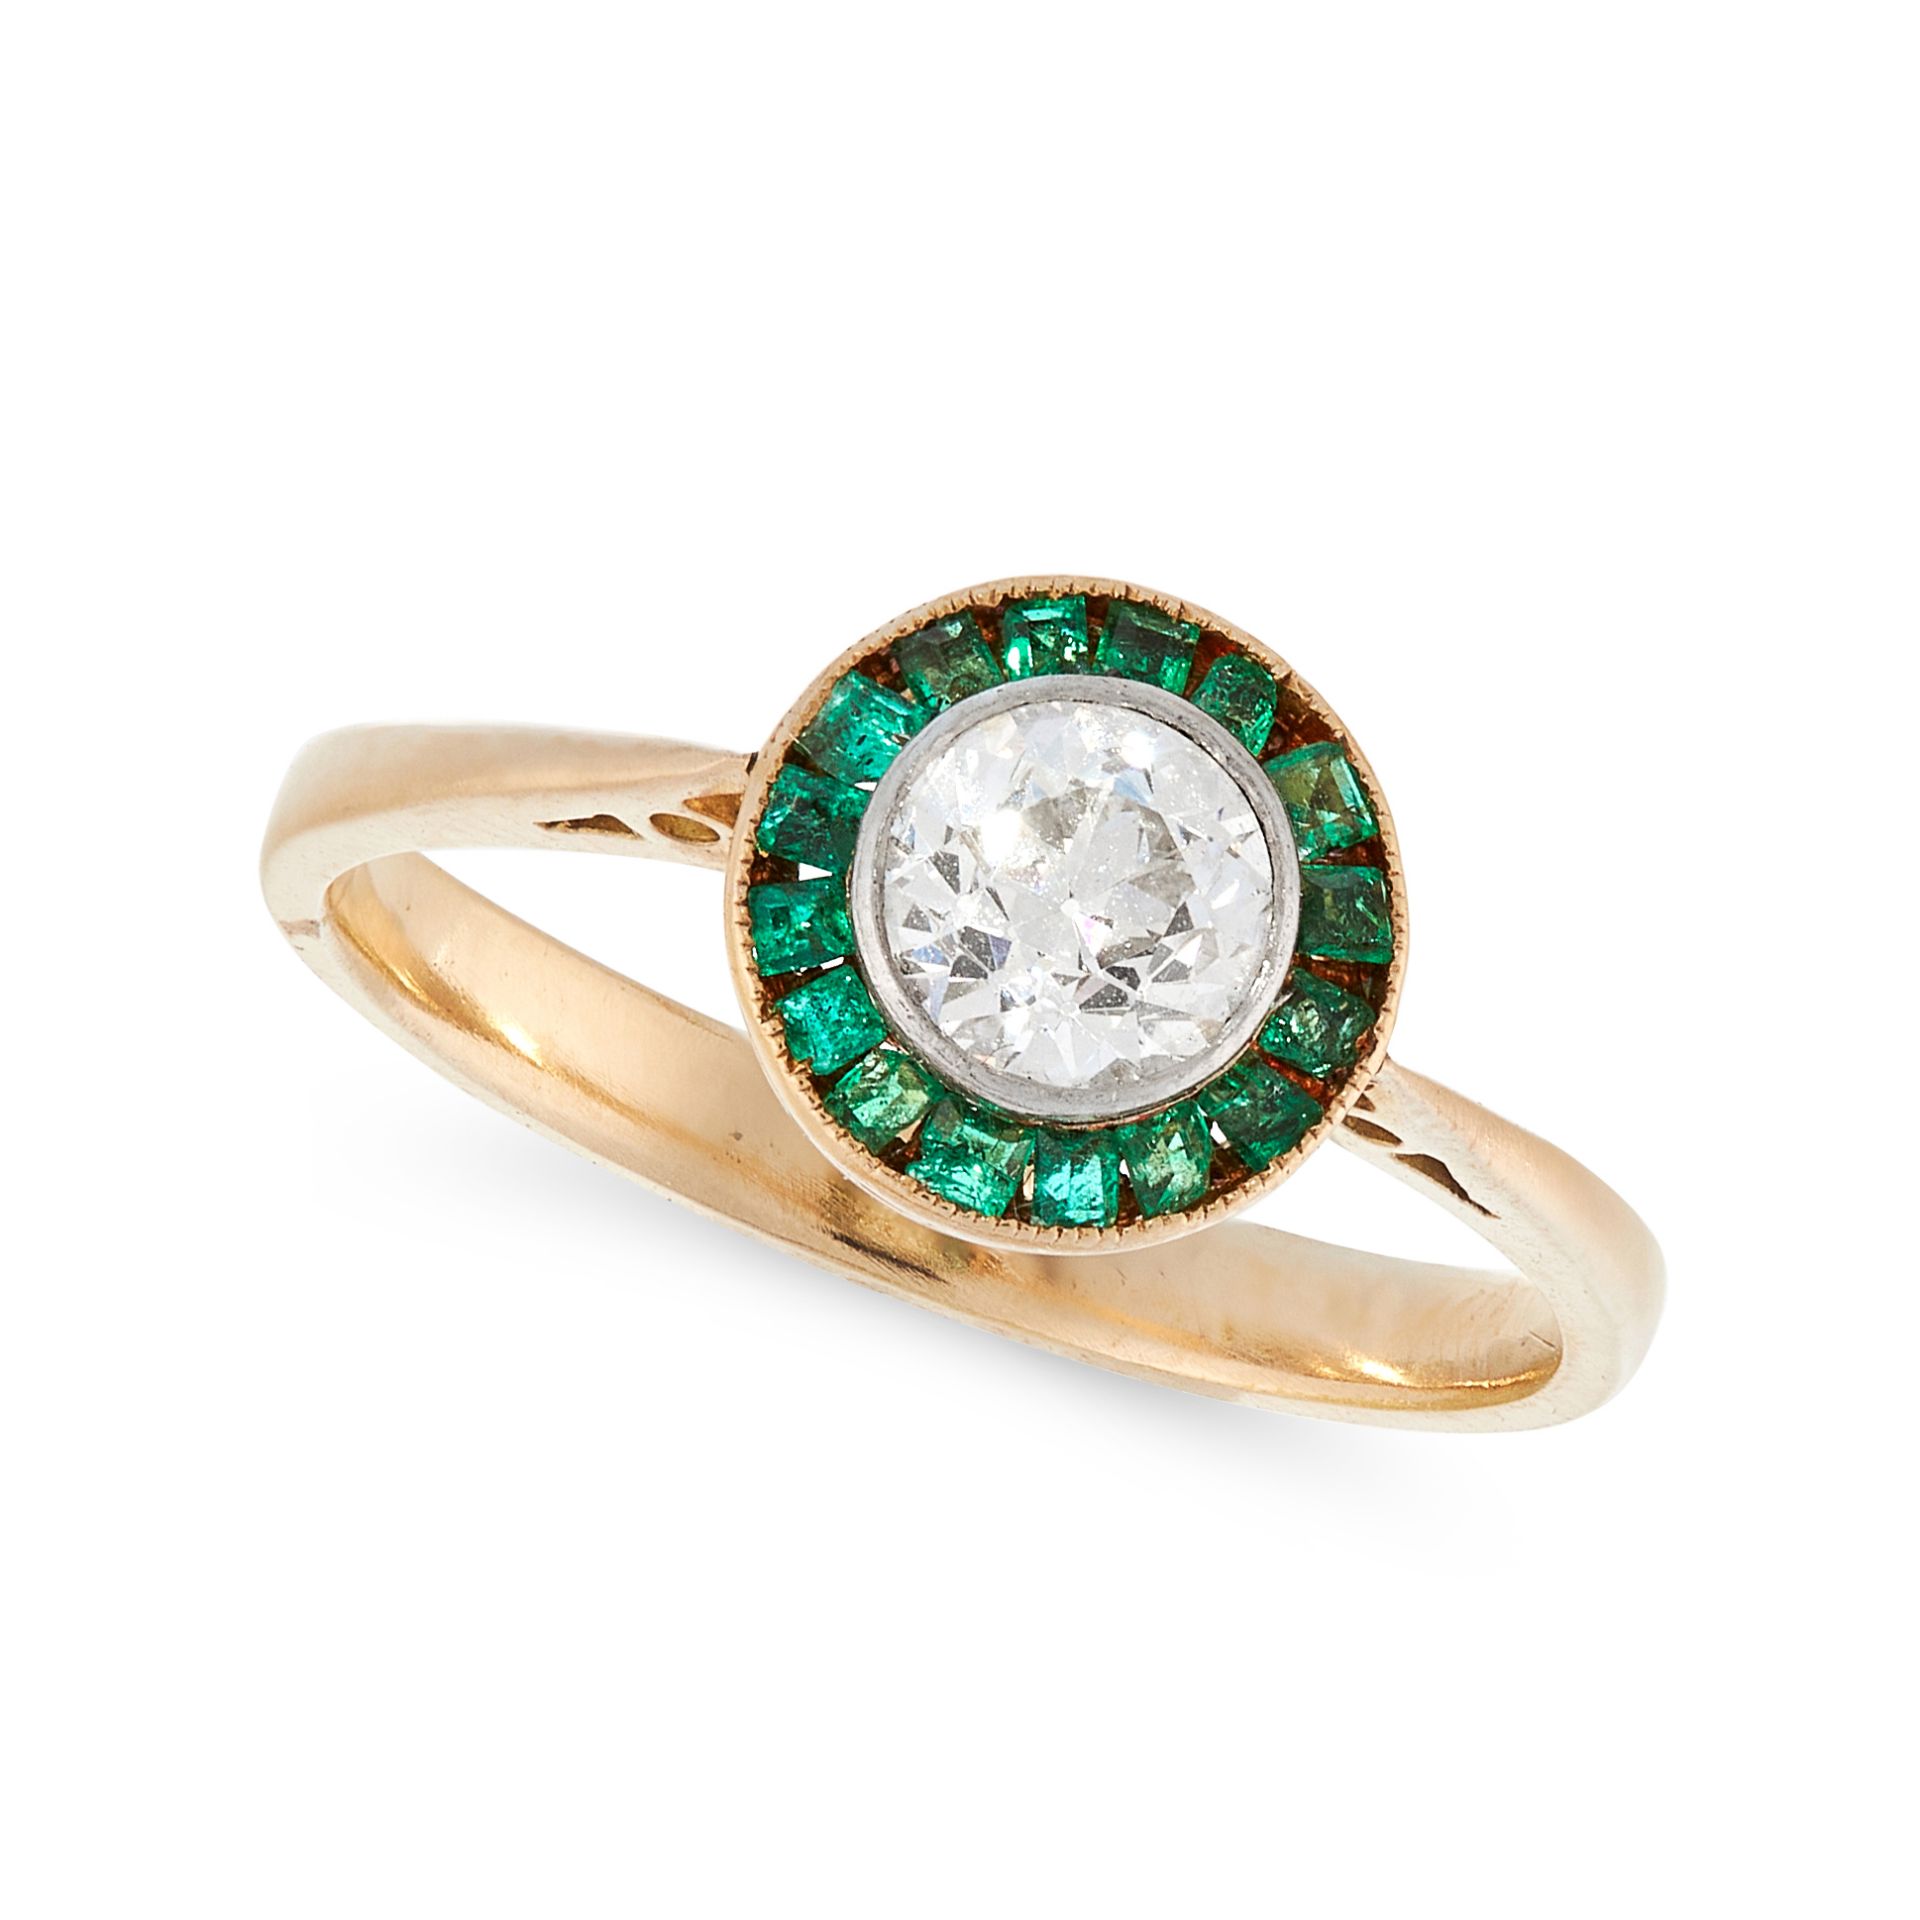 A DIAMOND AND EMERALD DRESS RING in high carat yellow gold, in target design, set with a central old